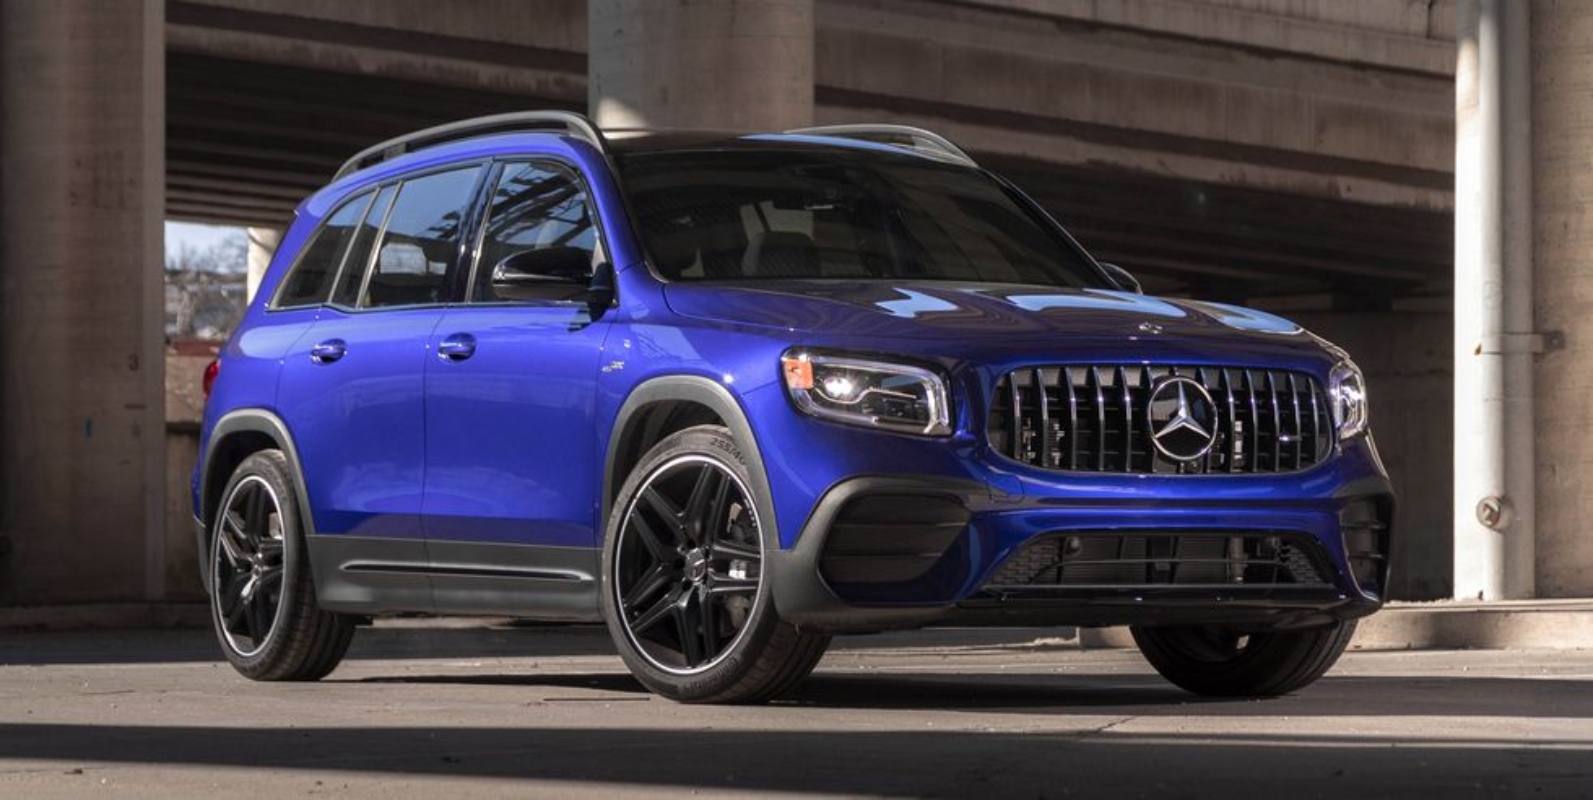 These extra small luxury SUVs include the Mercedes-Benz GLB-Class